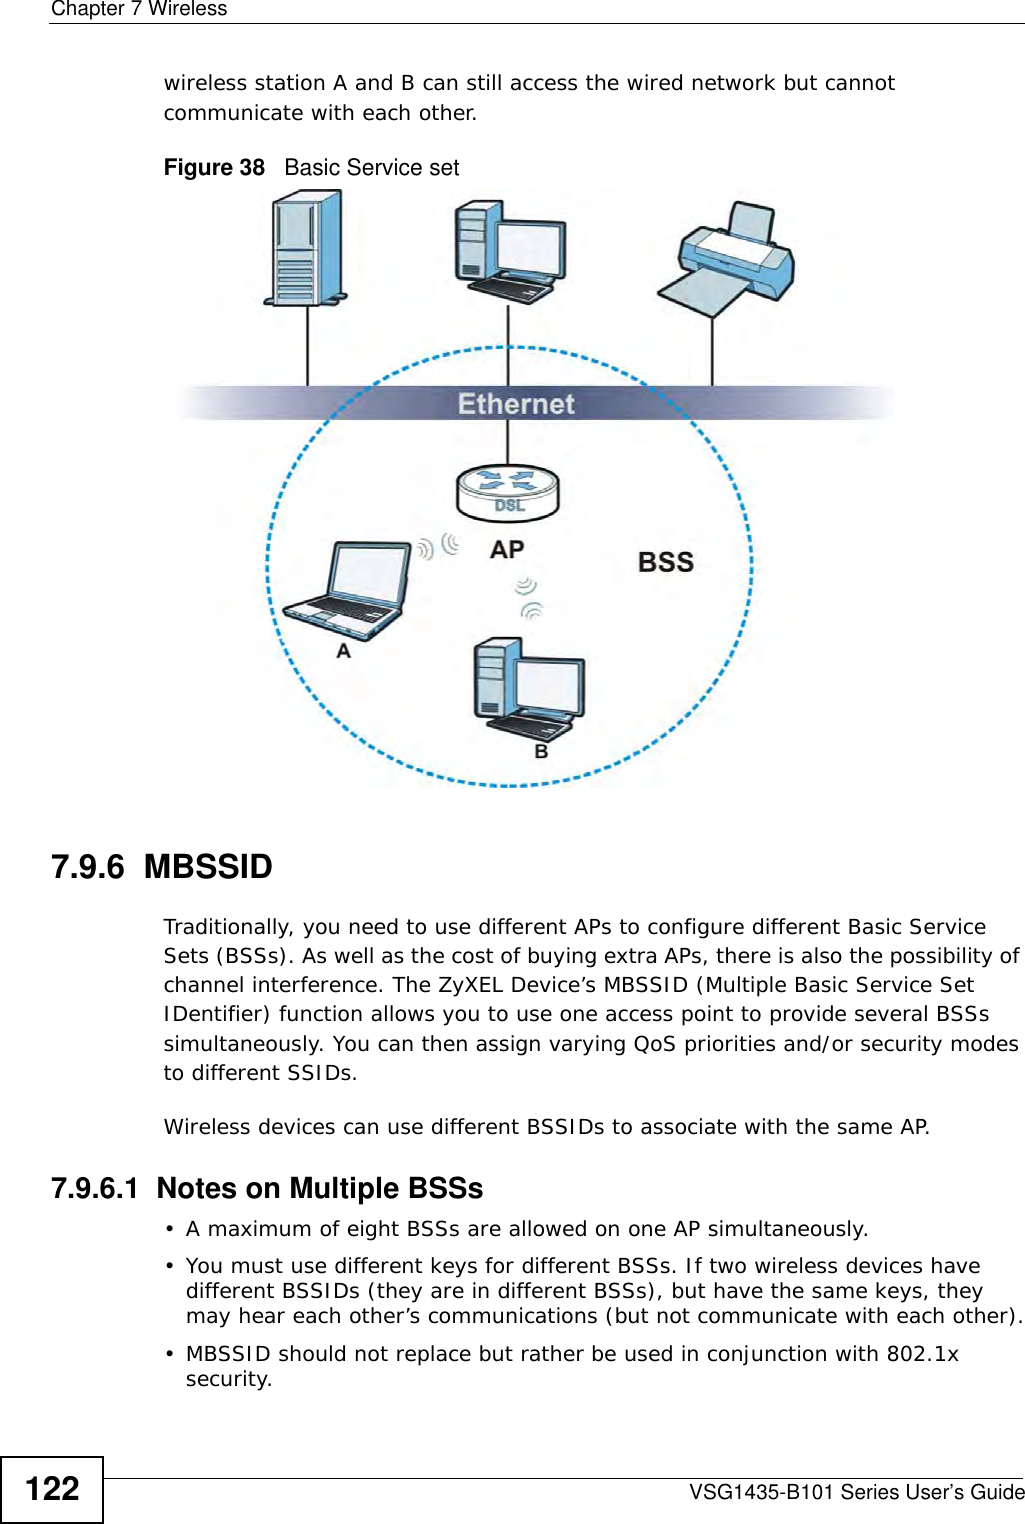 Chapter 7 WirelessVSG1435-B101 Series User’s Guide122wireless station A and B can still access the wired network but cannot communicate with each other.Figure 38   Basic Service set7.9.6  MBSSIDTraditionally, you need to use different APs to configure different Basic Service Sets (BSSs). As well as the cost of buying extra APs, there is also the possibility of channel interference. The ZyXEL Device’s MBSSID (Multiple Basic Service Set IDentifier) function allows you to use one access point to provide several BSSs simultaneously. You can then assign varying QoS priorities and/or security modes to different SSIDs.Wireless devices can use different BSSIDs to associate with the same AP.7.9.6.1  Notes on Multiple BSSs• A maximum of eight BSSs are allowed on one AP simultaneously.• You must use different keys for different BSSs. If two wireless devices have different BSSIDs (they are in different BSSs), but have the same keys, they may hear each other’s communications (but not communicate with each other).• MBSSID should not replace but rather be used in conjunction with 802.1x security.